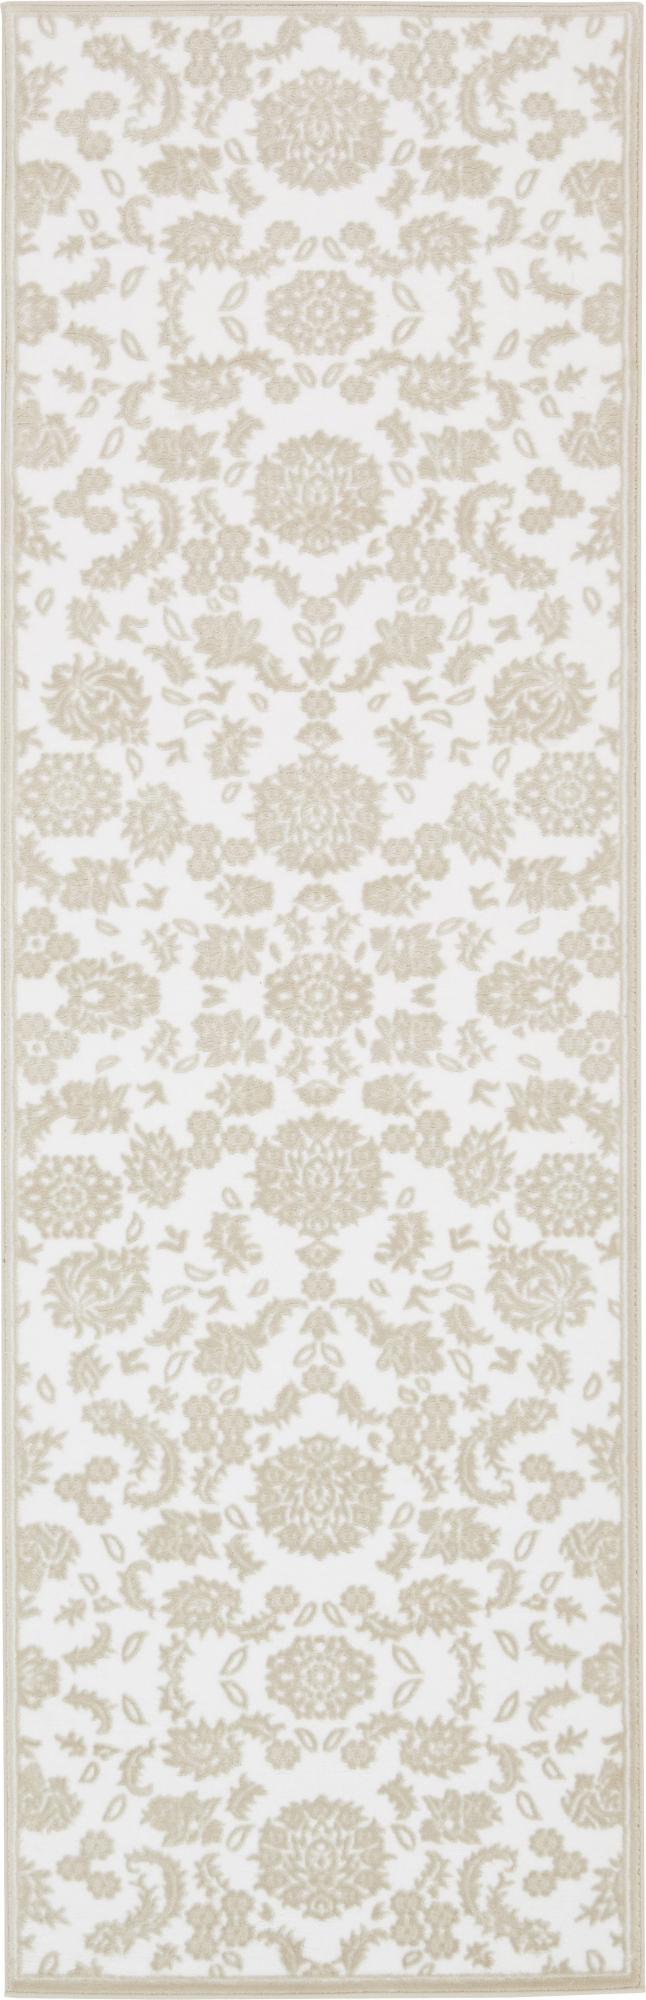 unique loom rushmore country & floral area rug collection